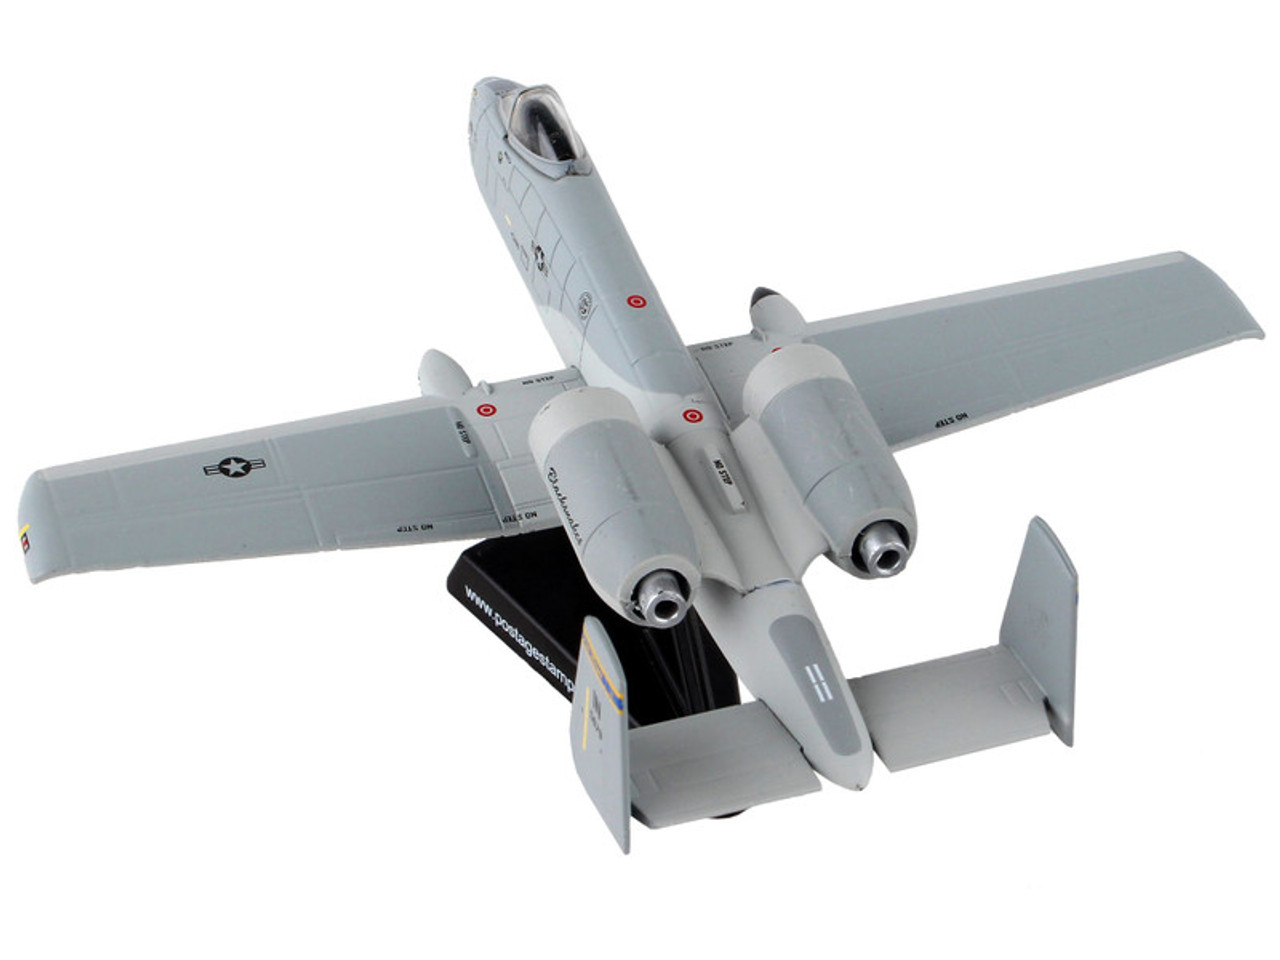 Fairchild Republic A-10 Thunderbolt II Warthog Aircraft "163rd Fighter Squadron Blacksnakes" United States Air Force 1/140 Diecast Model Airplane by Postage Stamp